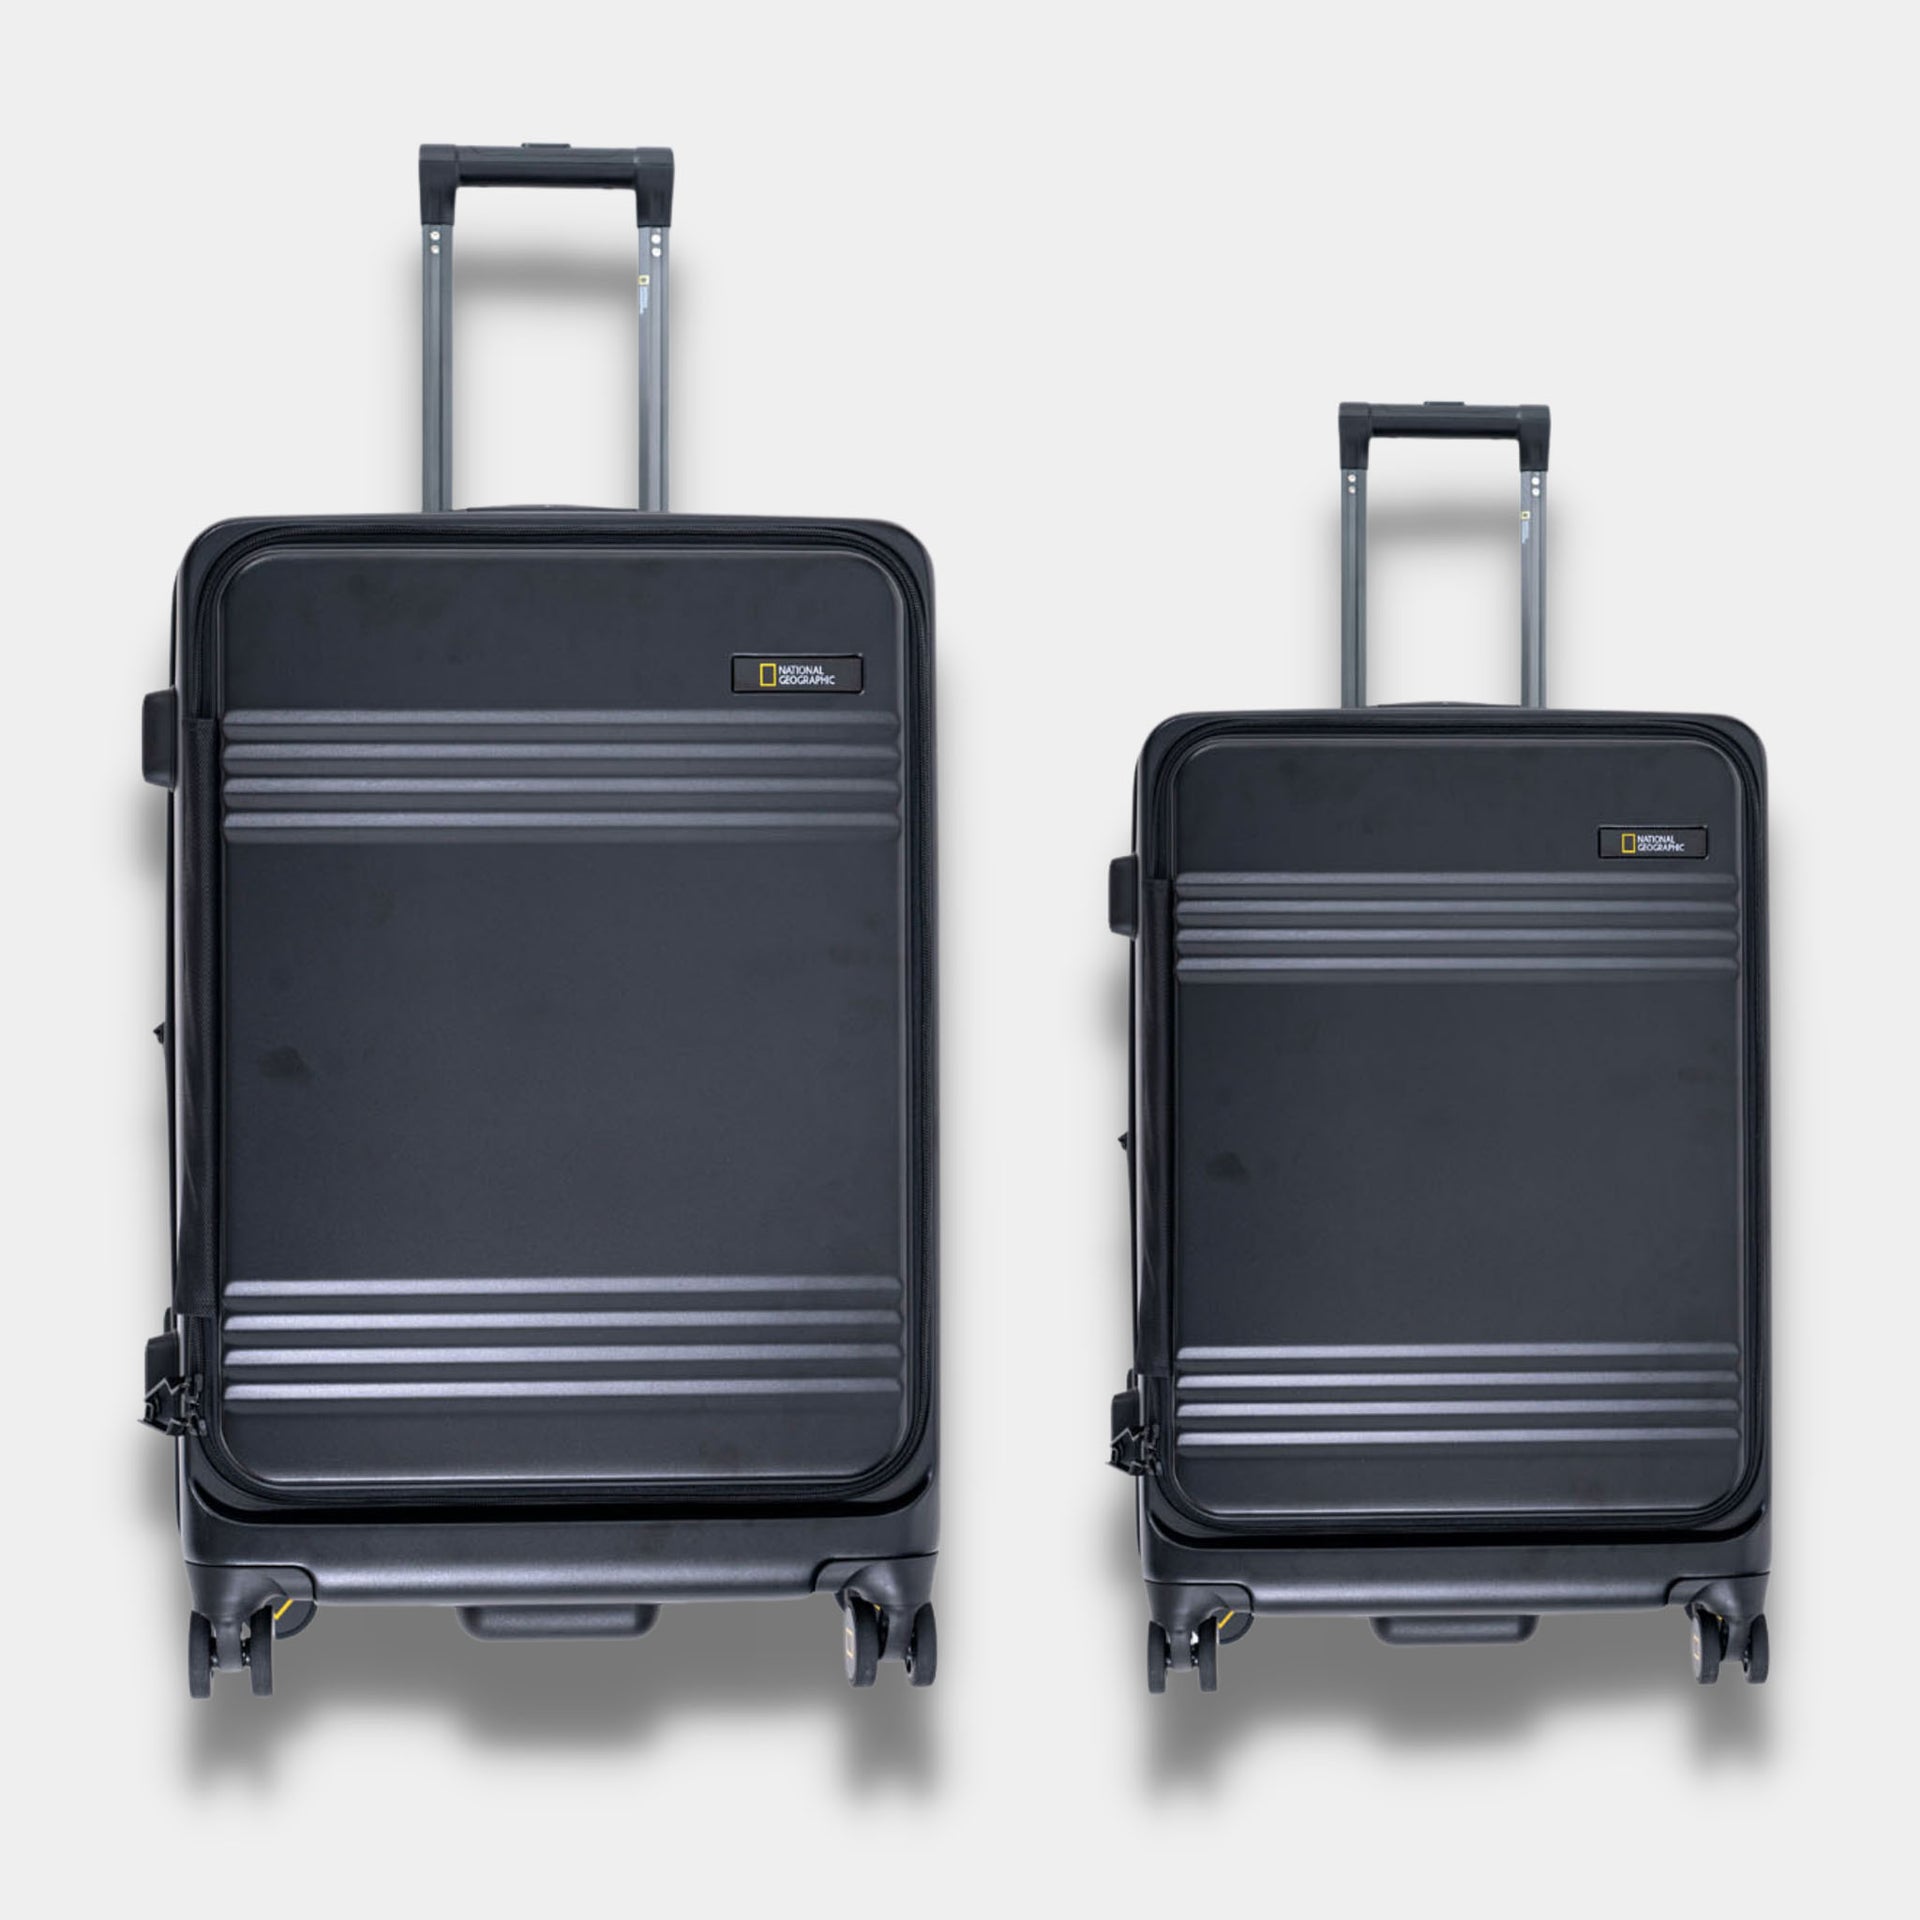 Lodge PC Luggage (Large) – Thee Bold Stories